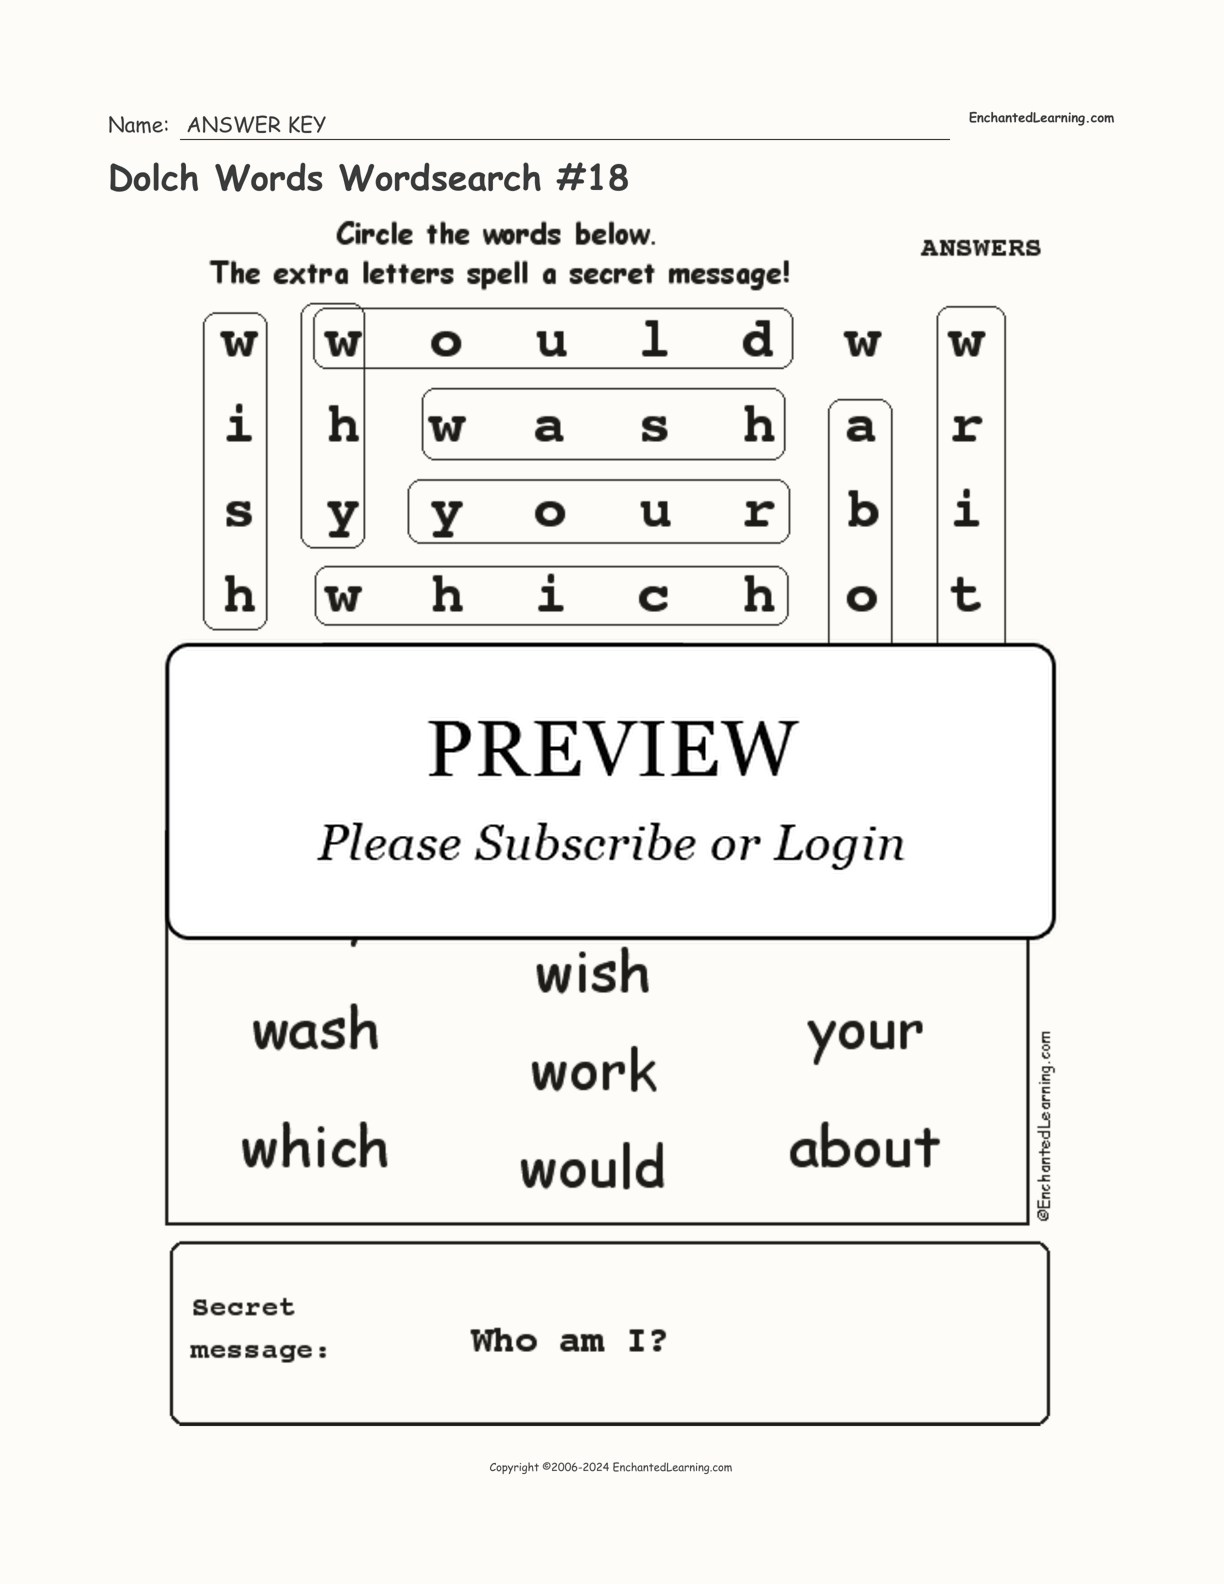 Dolch Words Wordsearch #18 interactive worksheet page 2